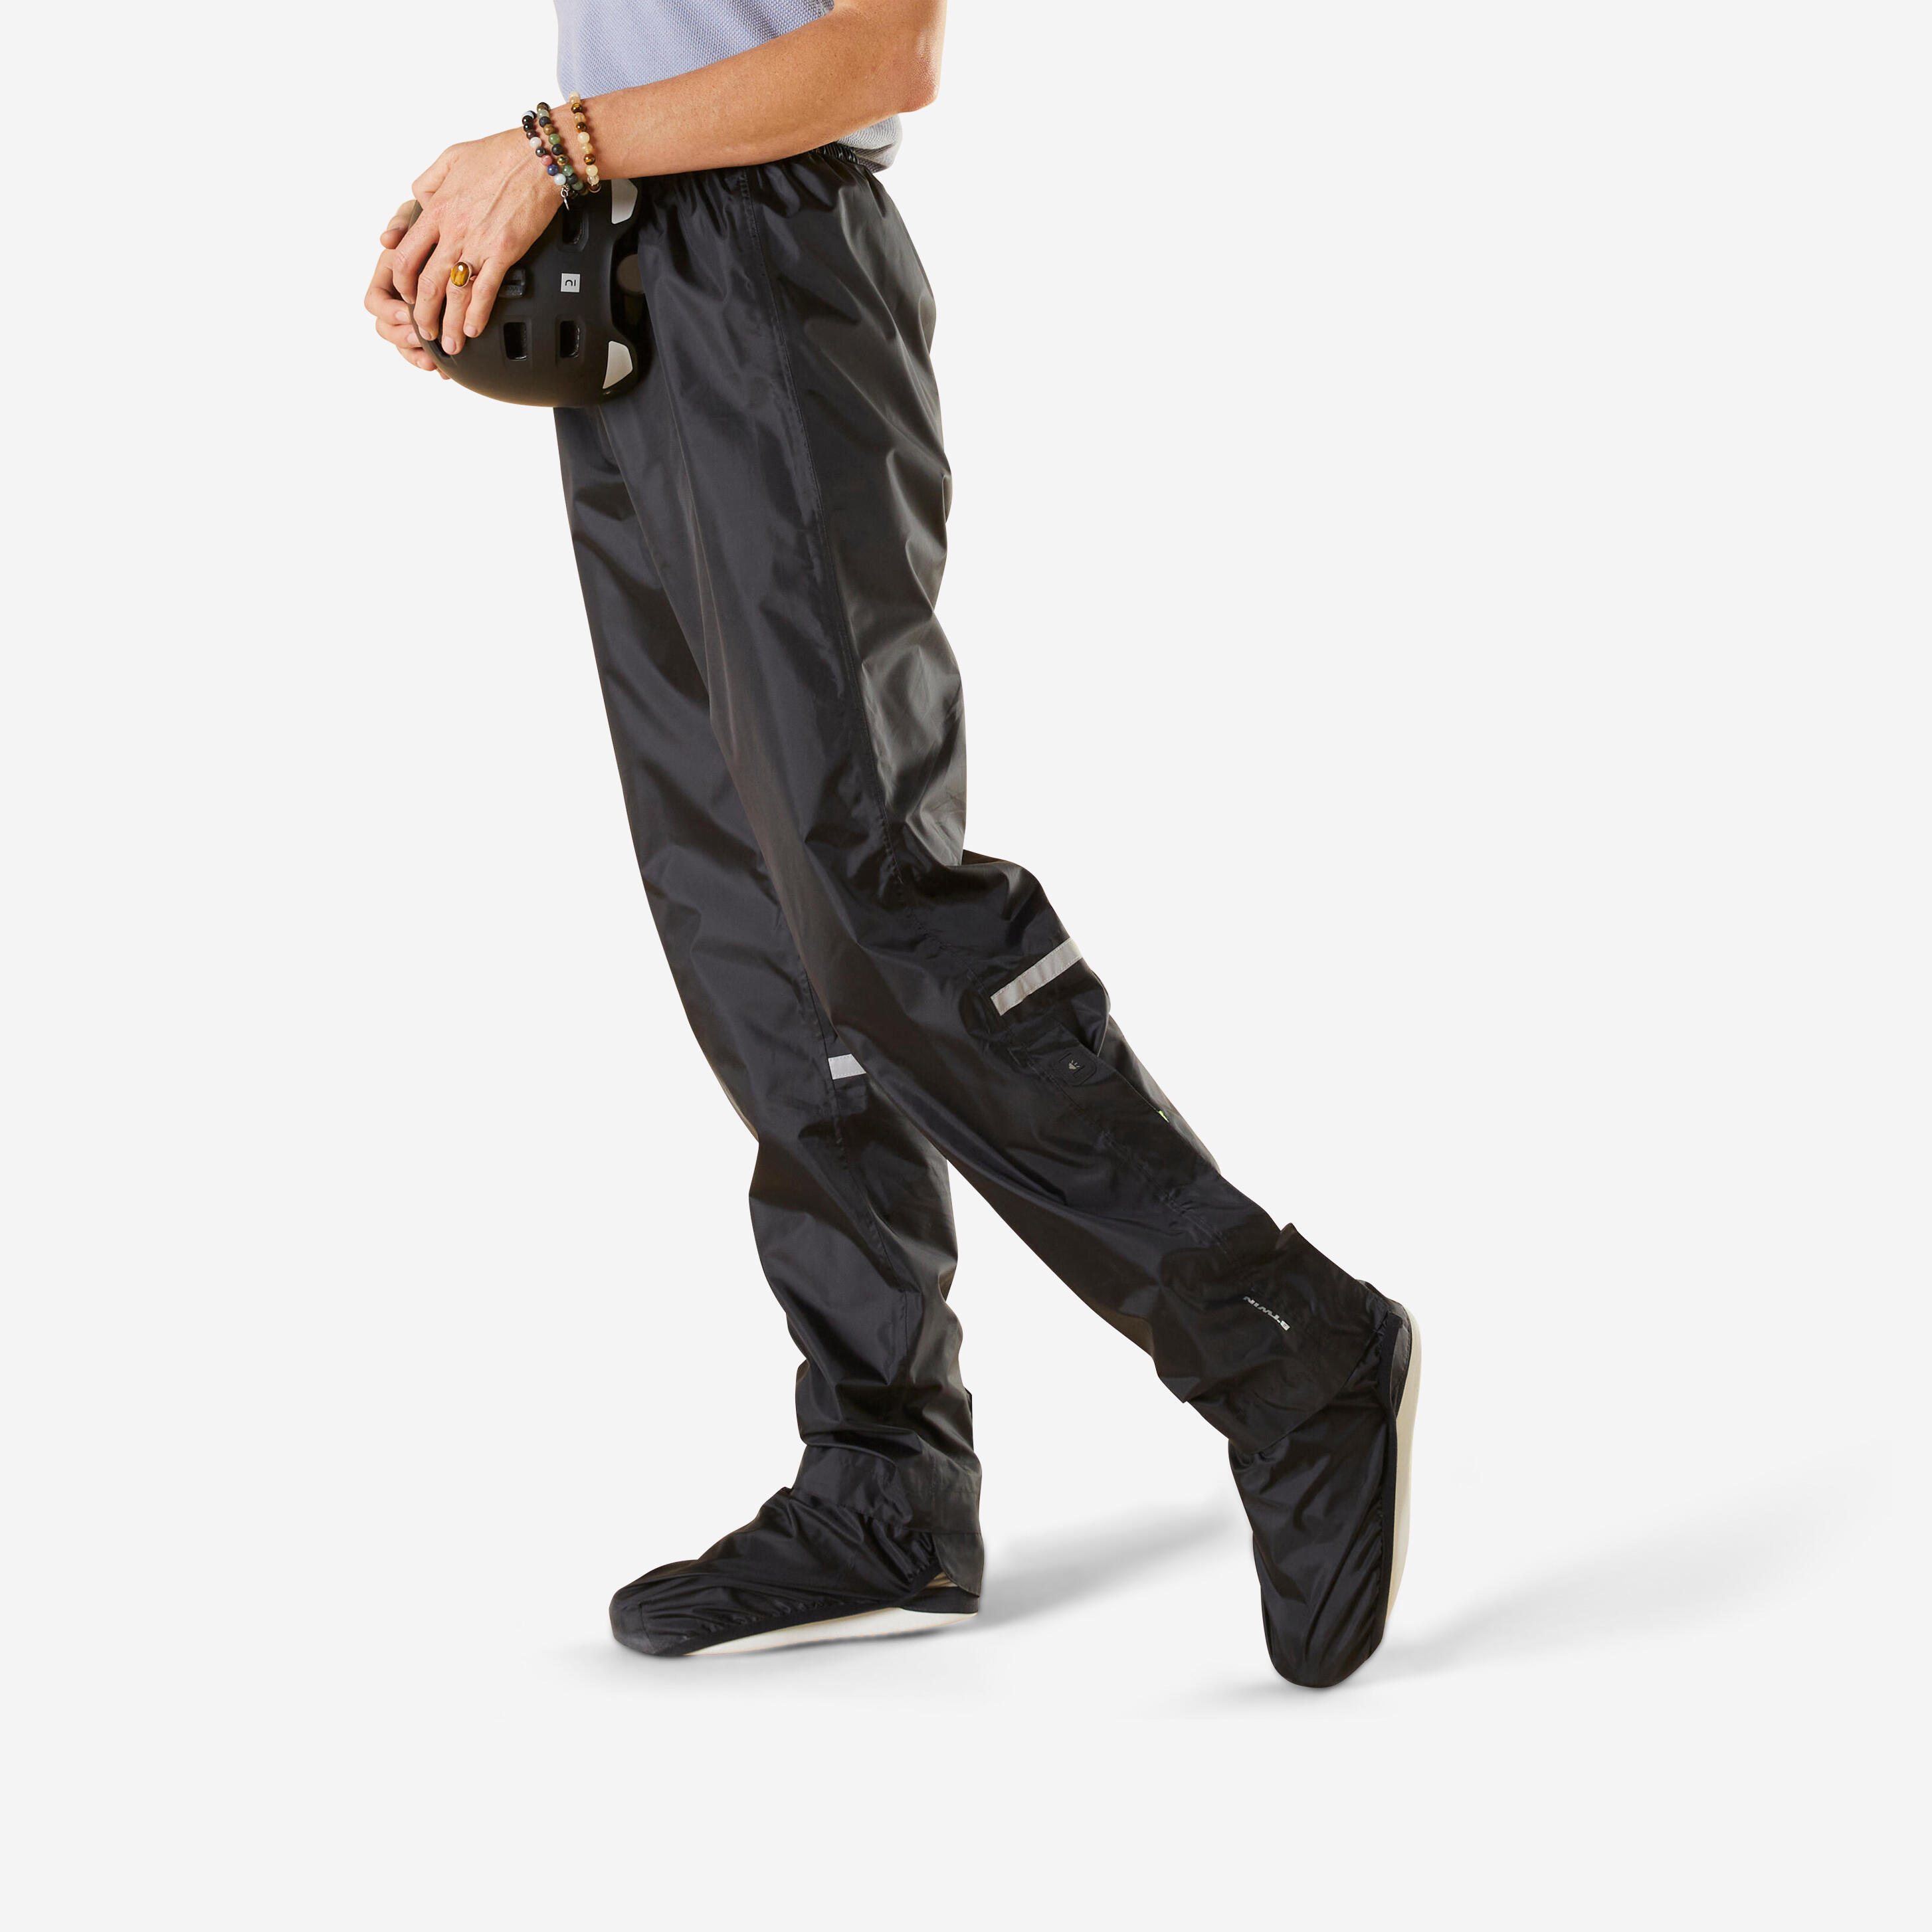 City Cycling Rain Overtrousers with Built-In Overshoes 100 - Black 1/14